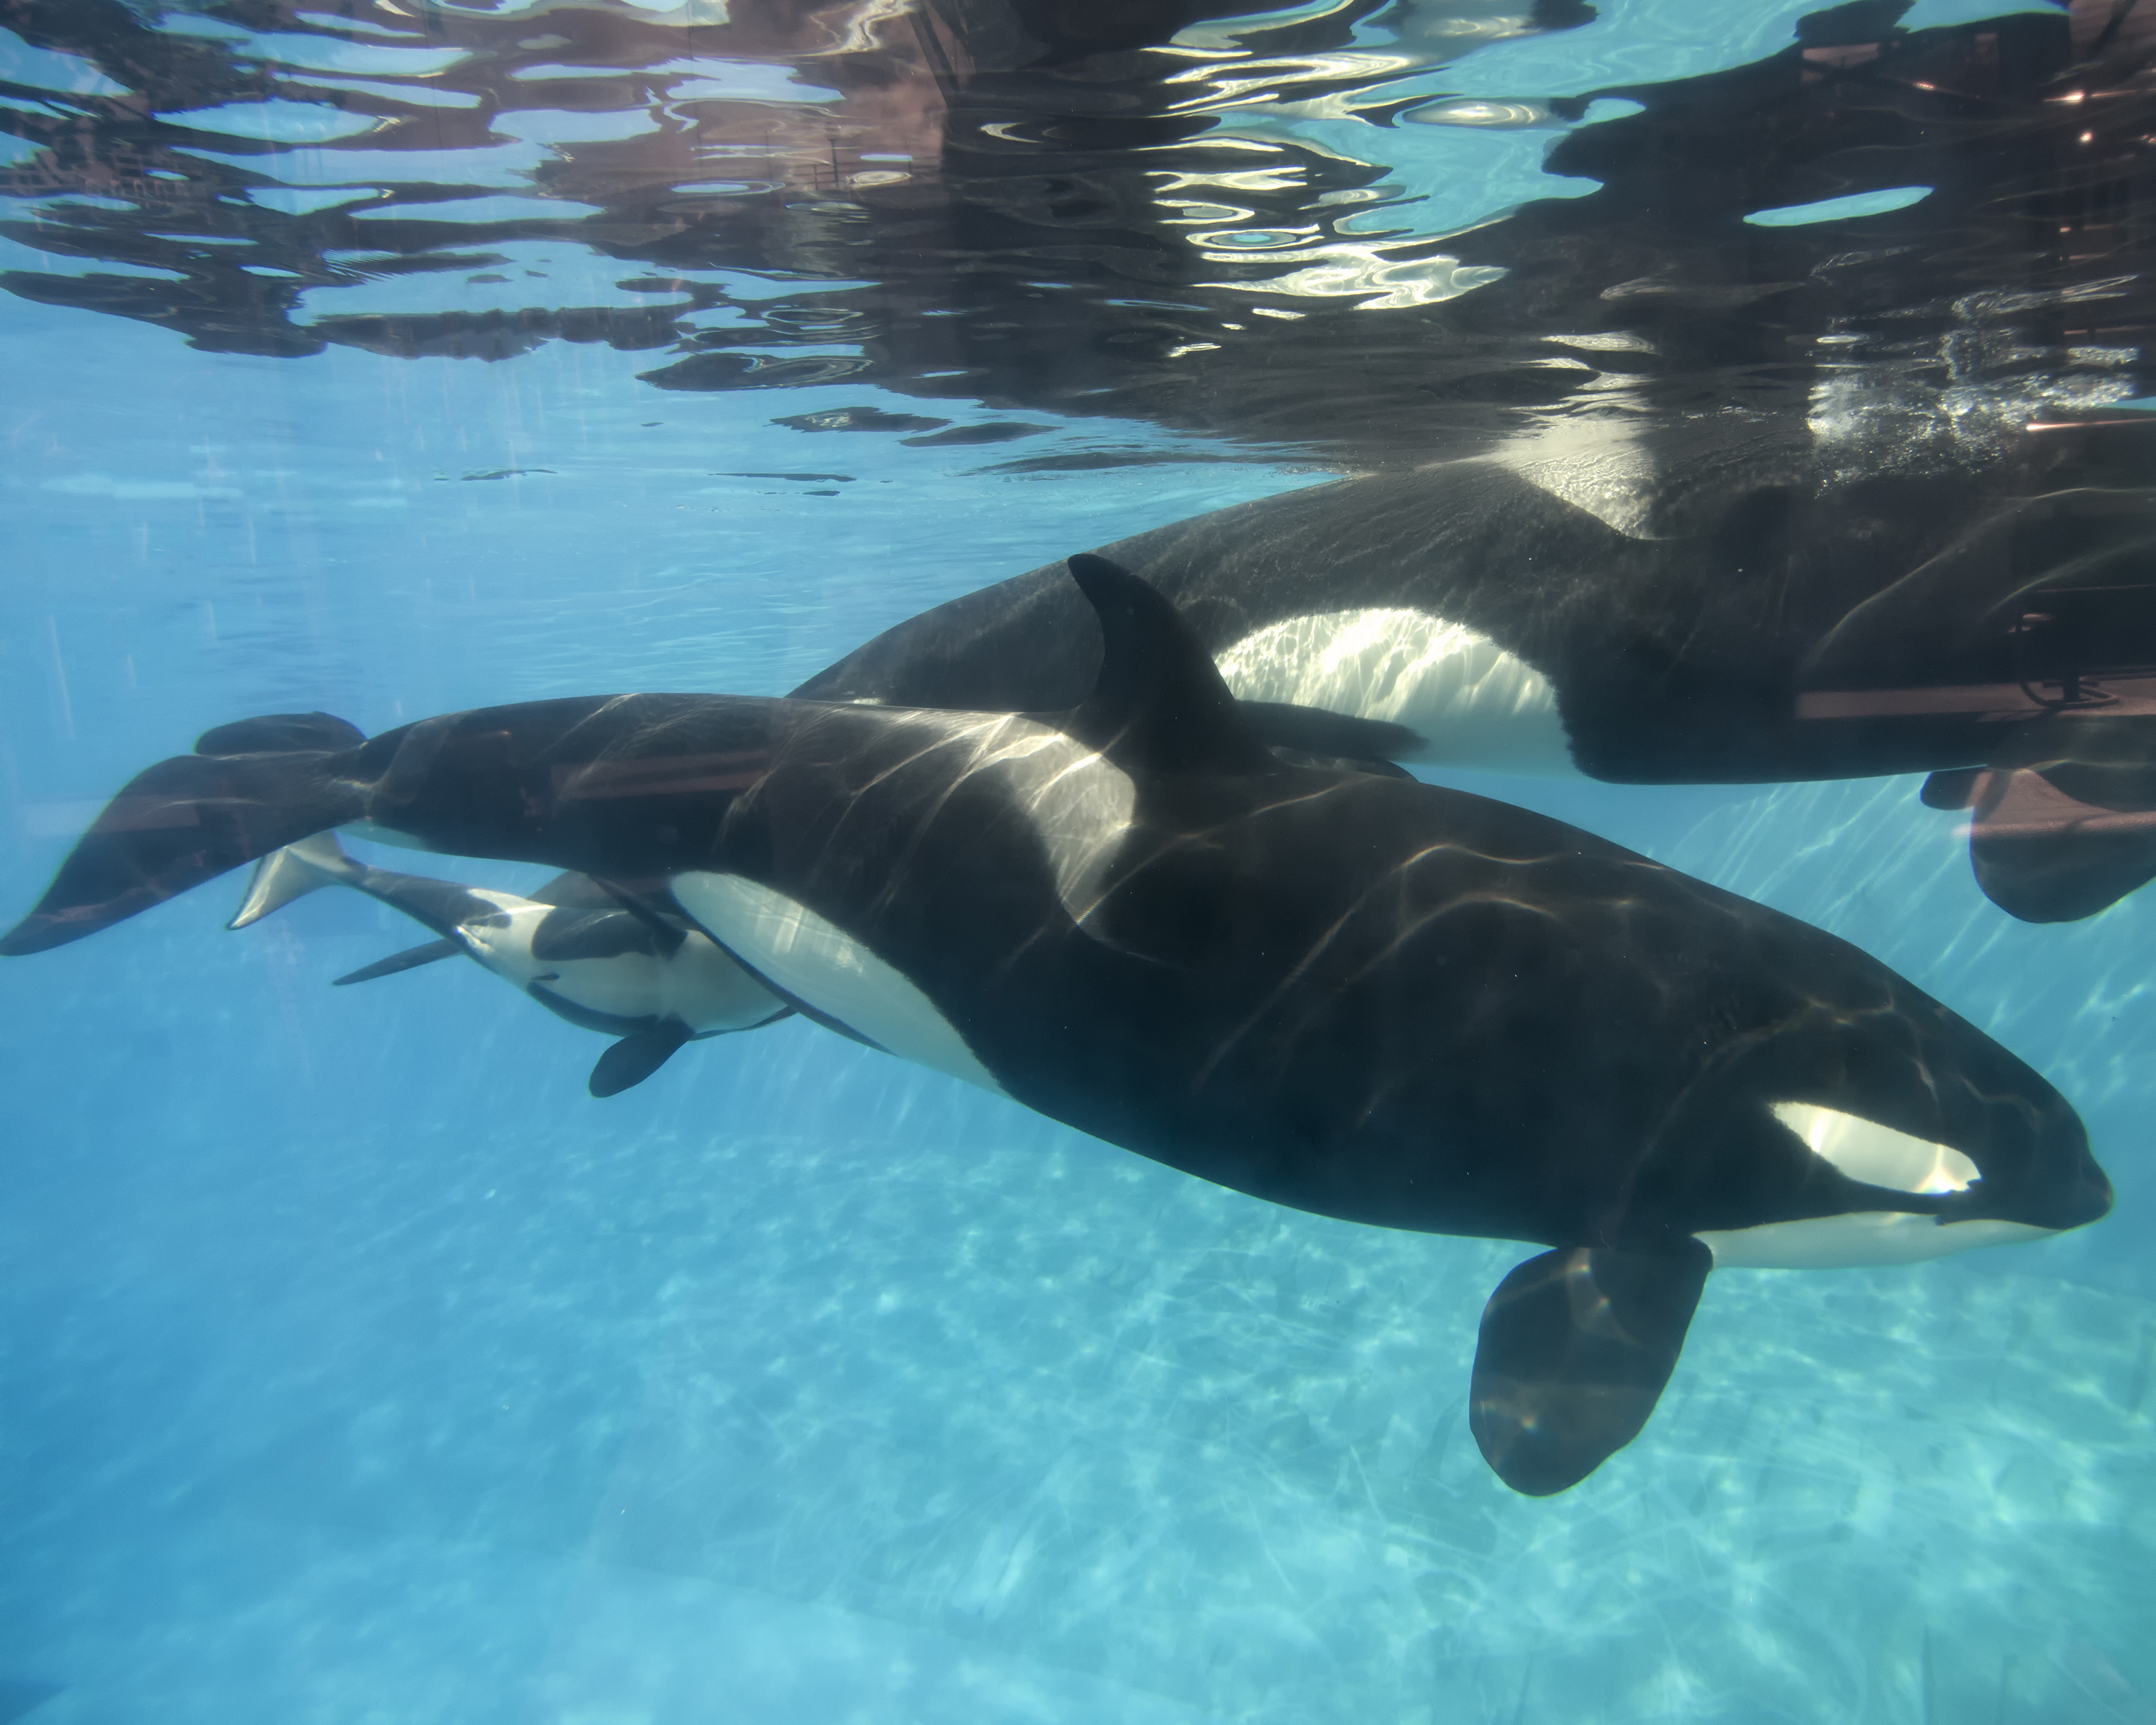 In this handout photo provided by SeaWorld San Diego, a baby killer whale calf nurses from its mother, Kalia, at SeaWorld San Diego's Shamu Stadium December 4, 2014 in San Diego, California. (Handout&mdash;Getty Images)